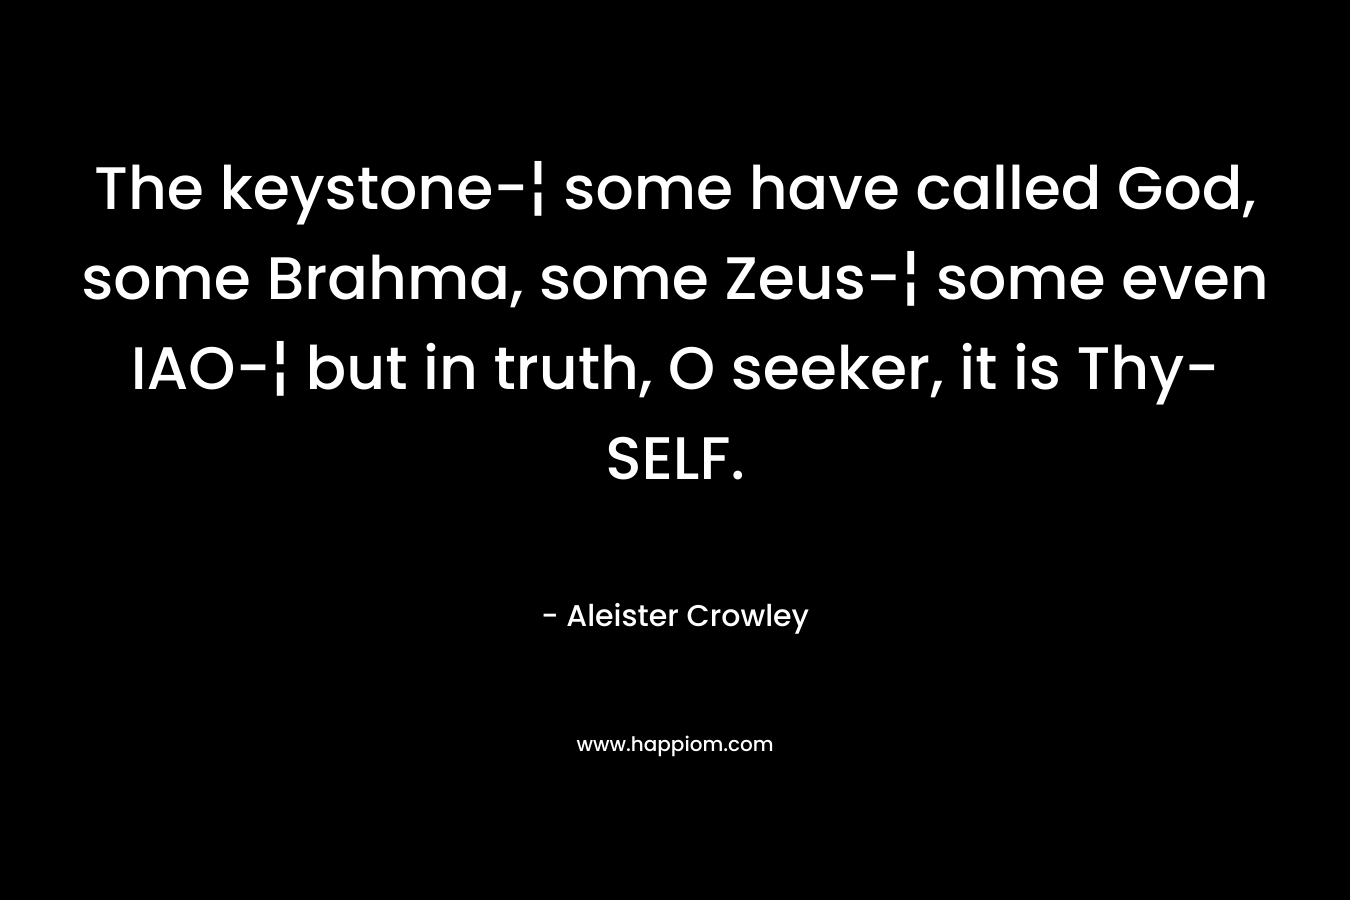 The keystone-¦ some have called God, some Brahma, some Zeus-¦ some even IAO-¦ but in truth, O seeker, it is Thy-SELF. – Aleister Crowley